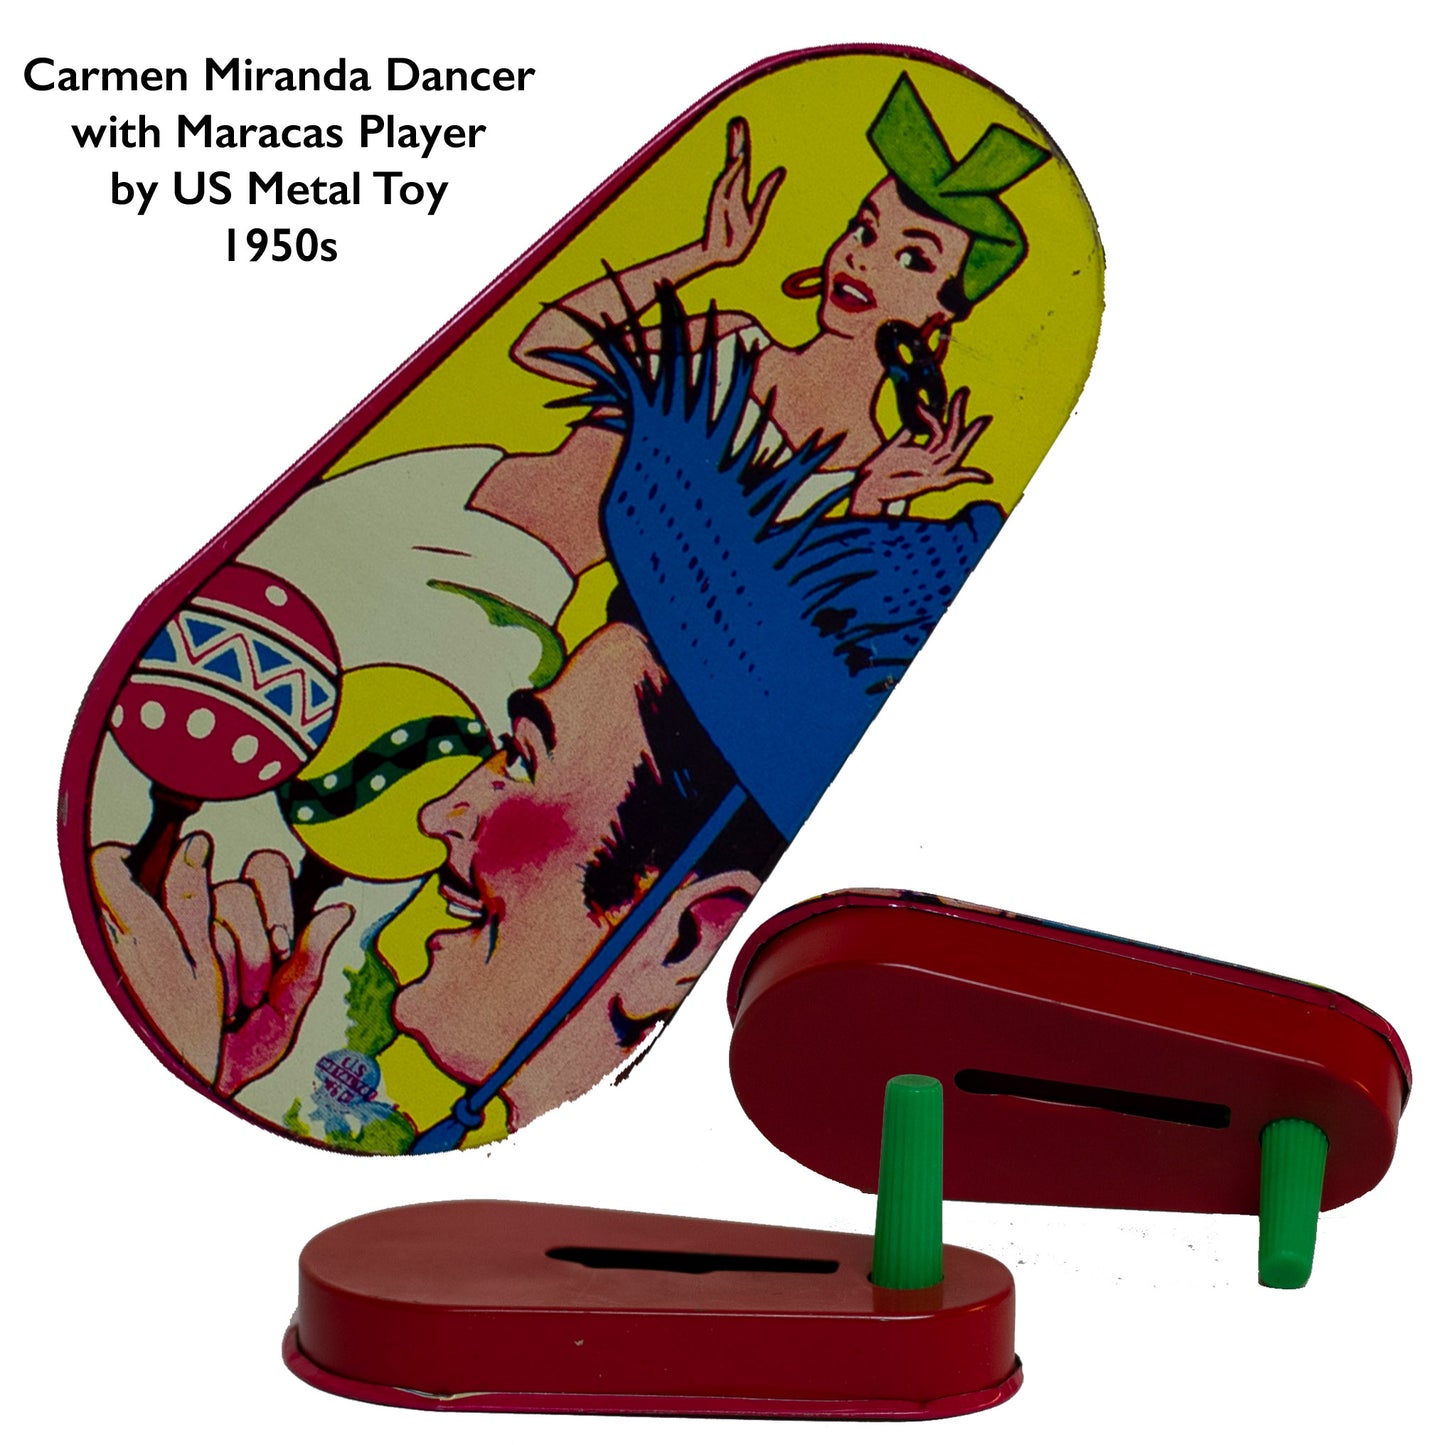 TIN-LITHOGRAPH RATCHET-STYLE CARMEN MIRANDA NOISEMAKER made by US Metal Toys from the late 1940s to 1950s with lithograph depicting "The Brazilian Bombshell, Carmen Miranda" dancing to maracas. Lithograph is in great condition with festive colors and no scratches or rust.